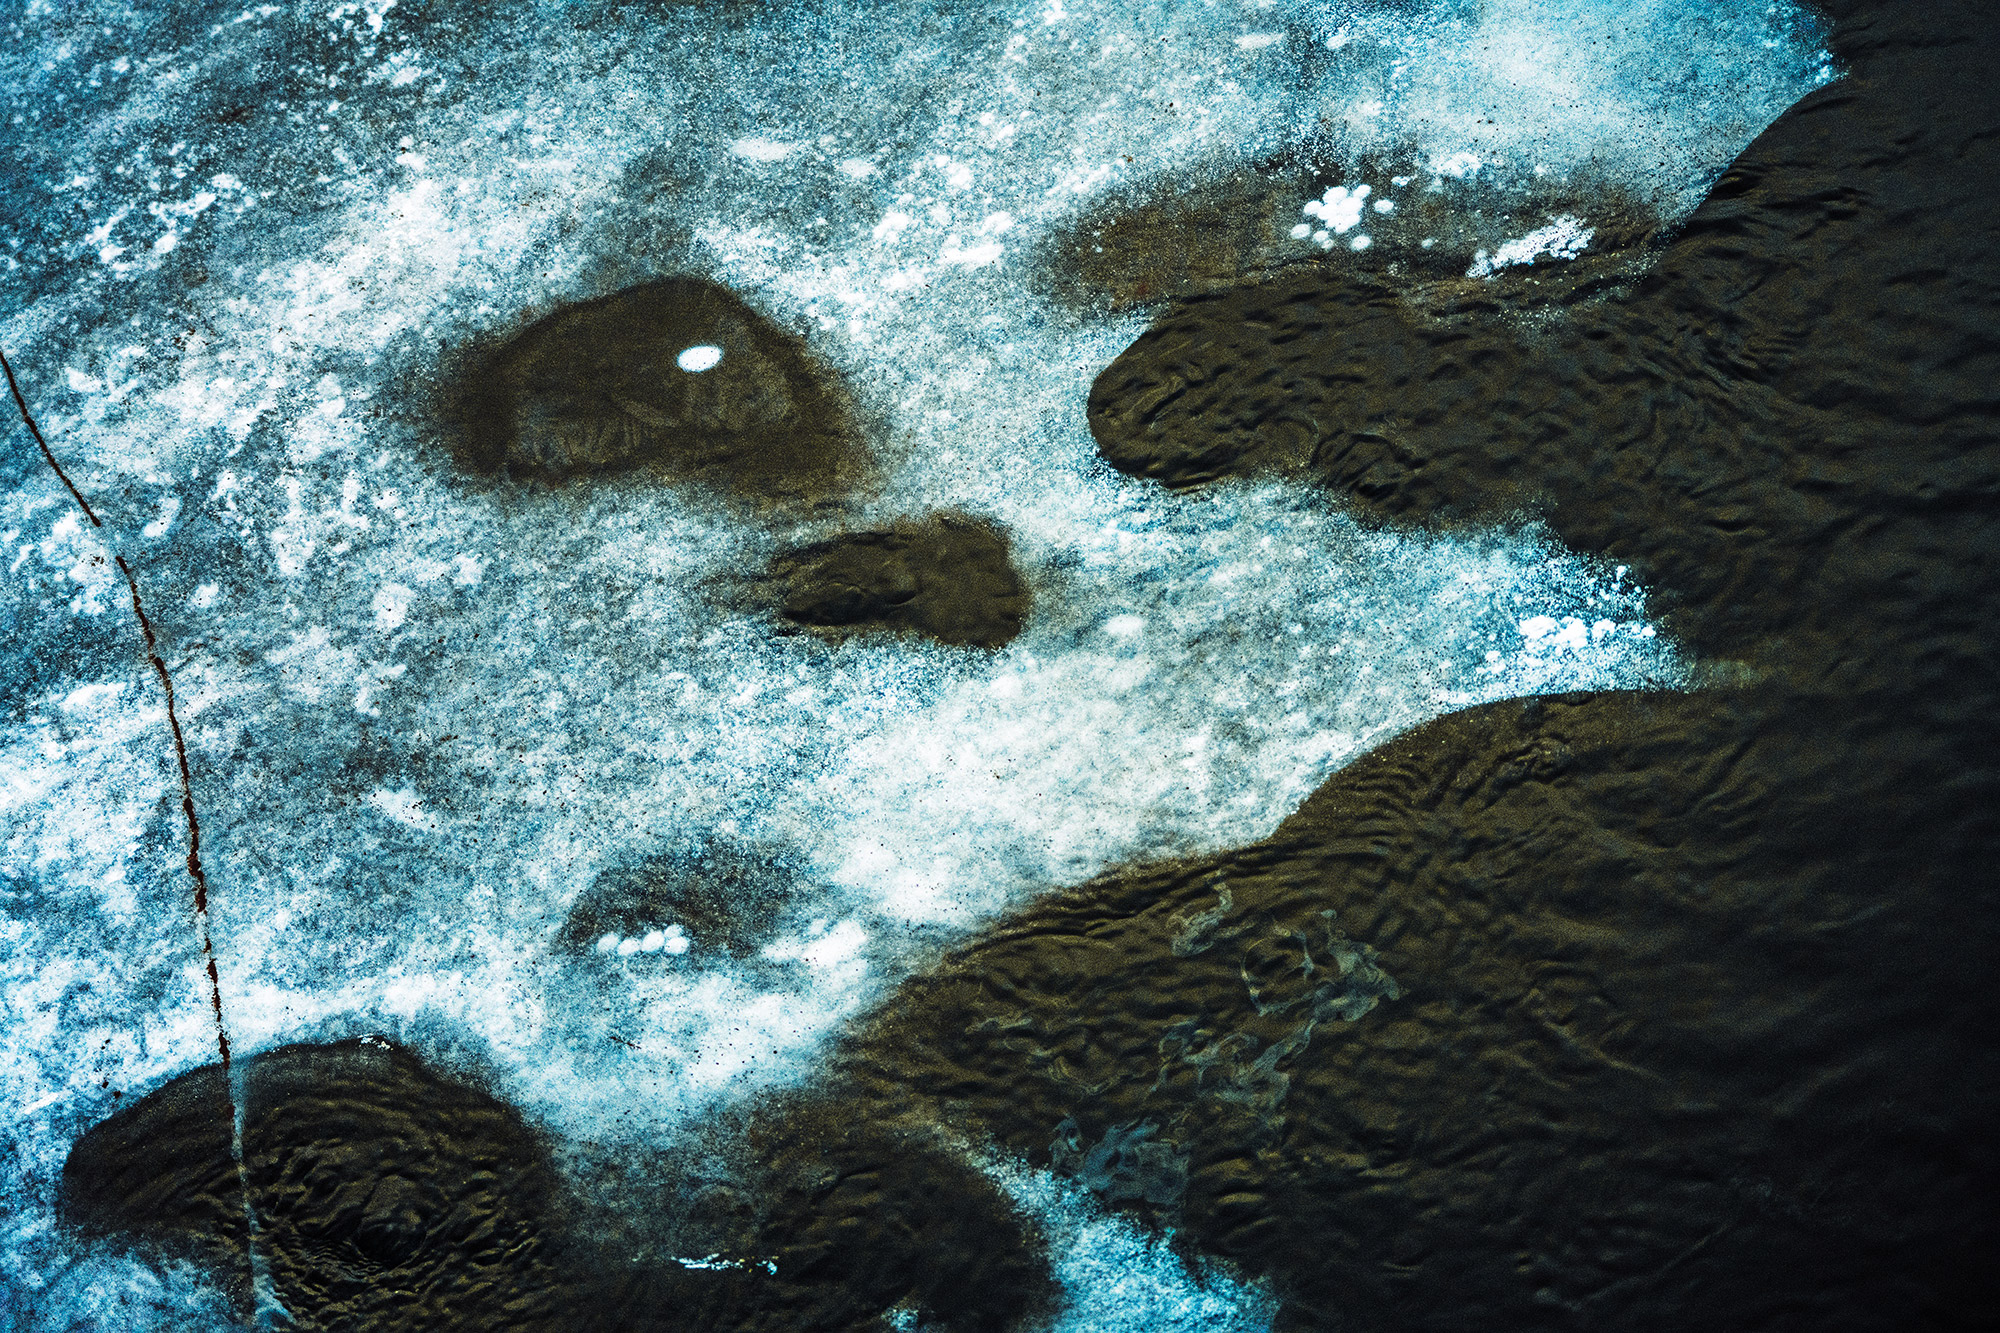 Disintegrating Ice Face Melting Among Flowing River Water (Color Photo)